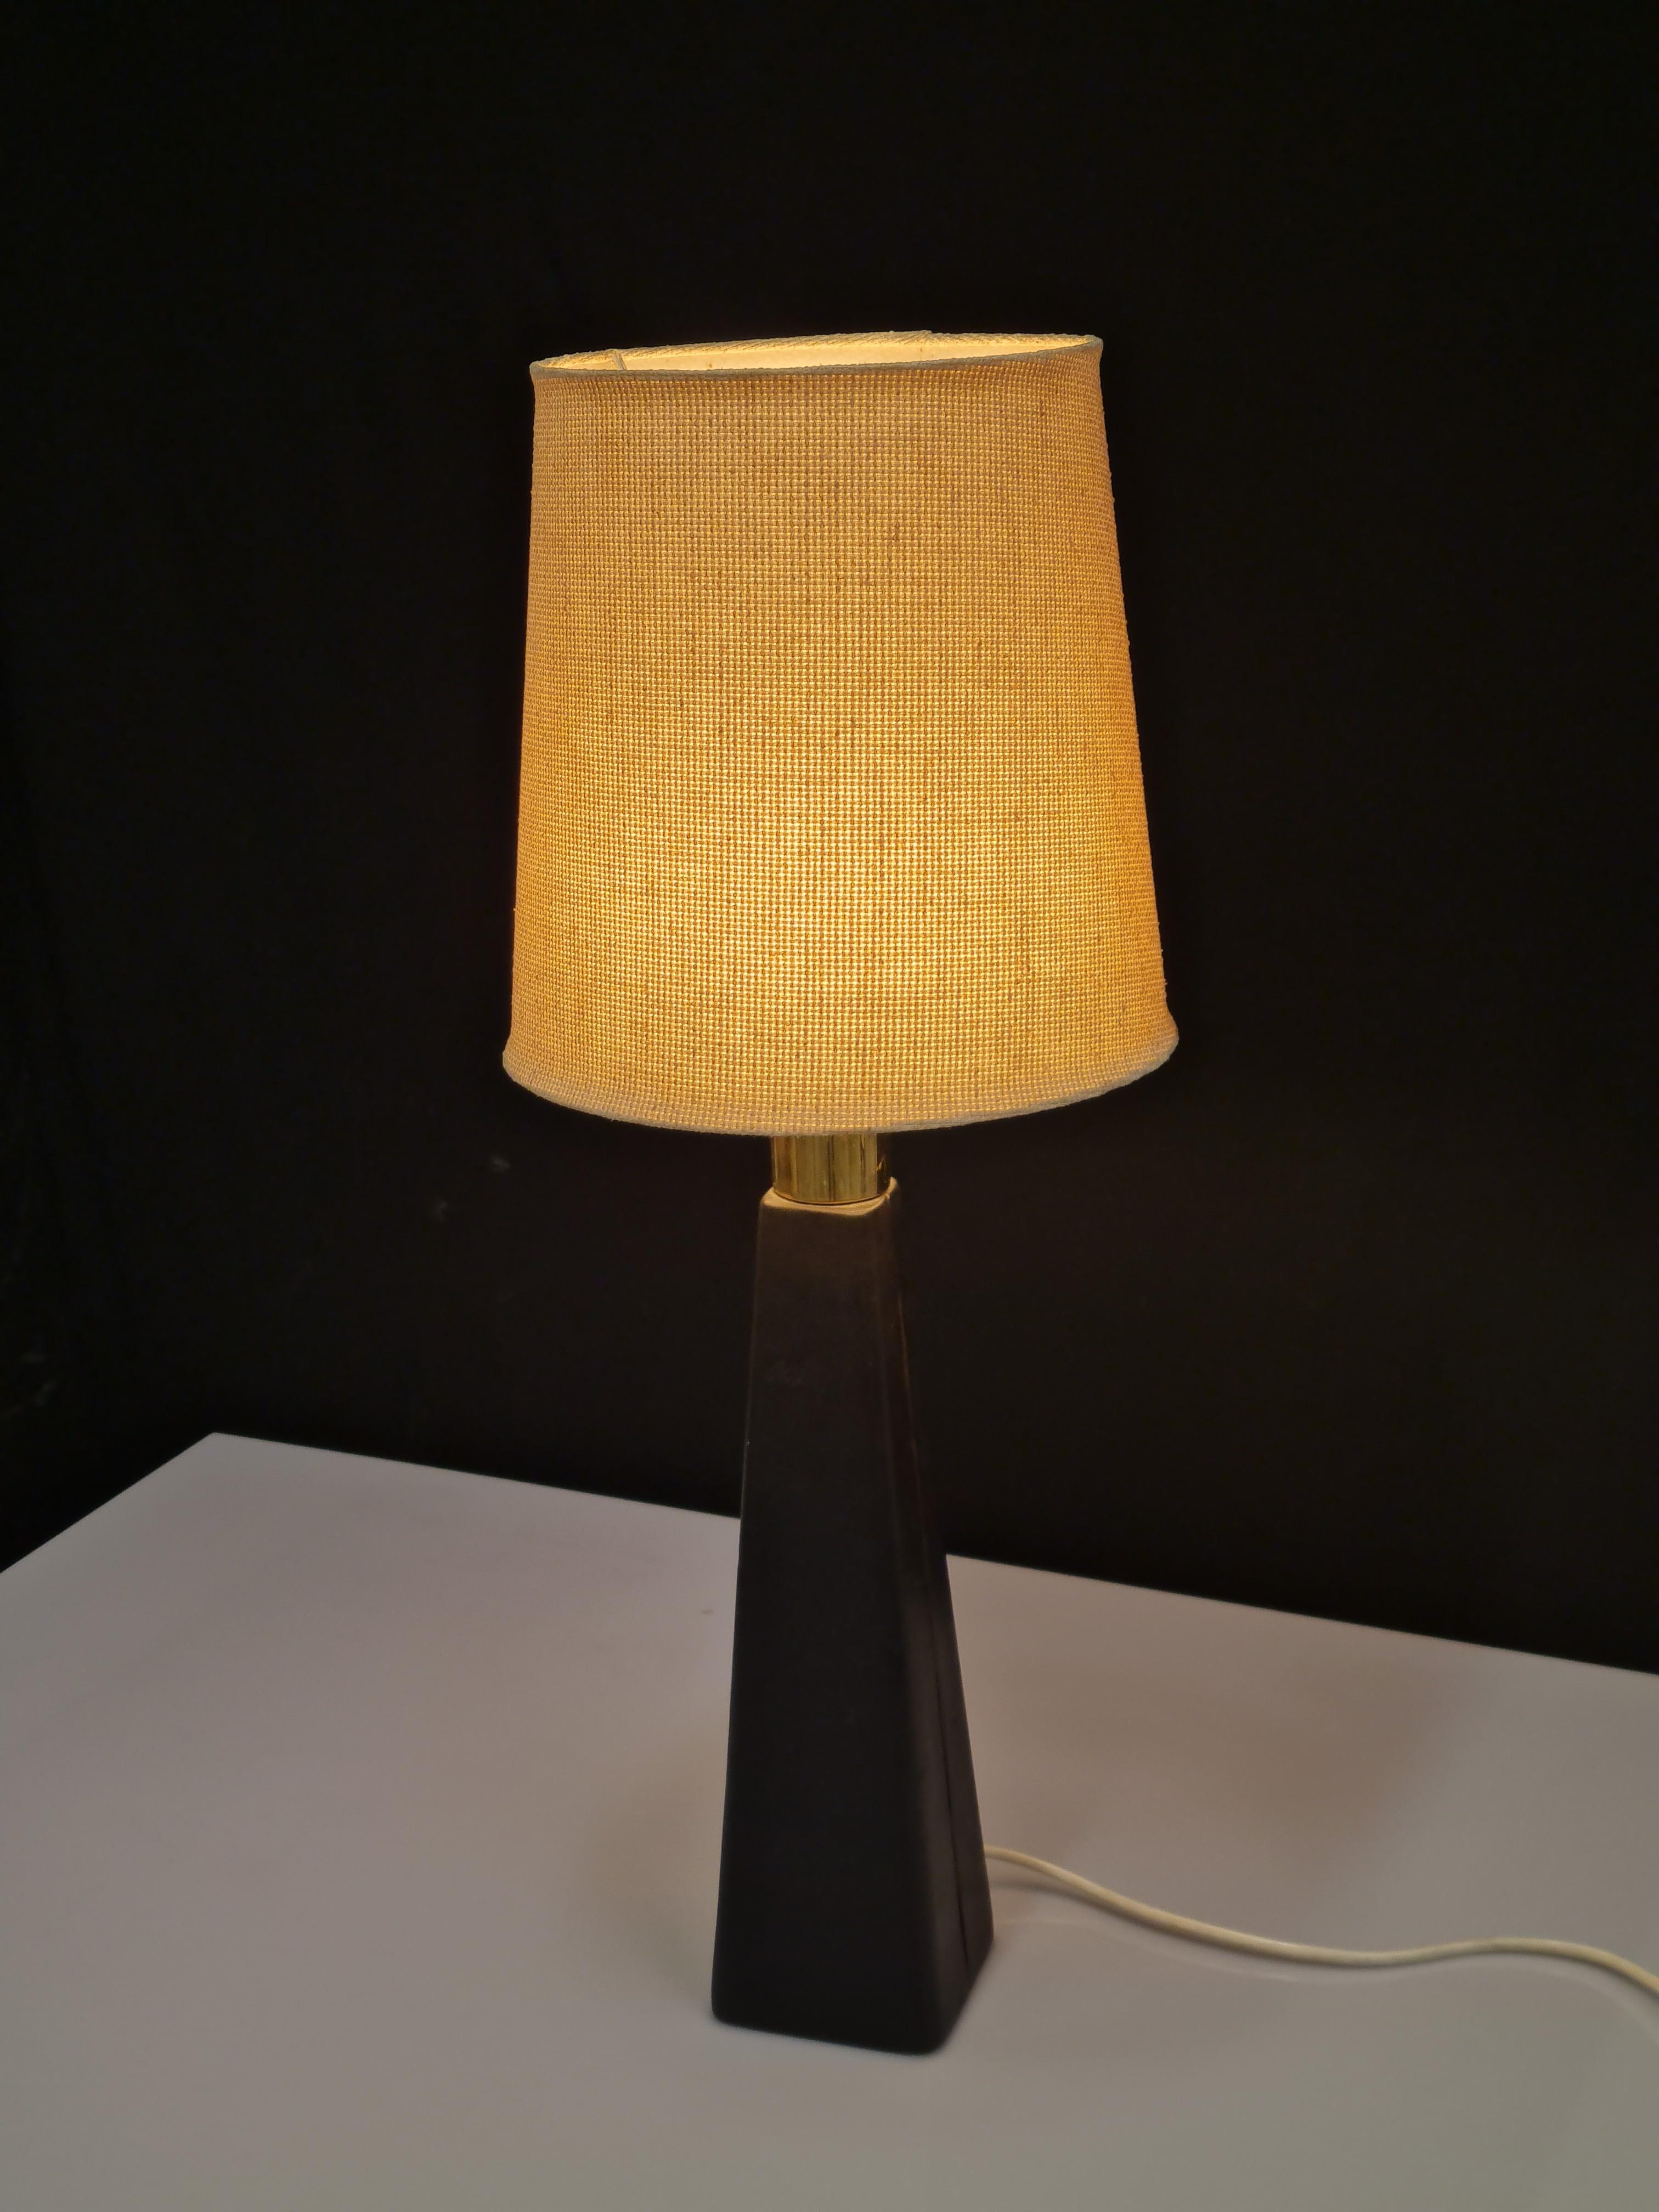 Lisa Johansson-Papé Table Lamp 46-186 LJP in Leather and Linen, Orno For Sale 2